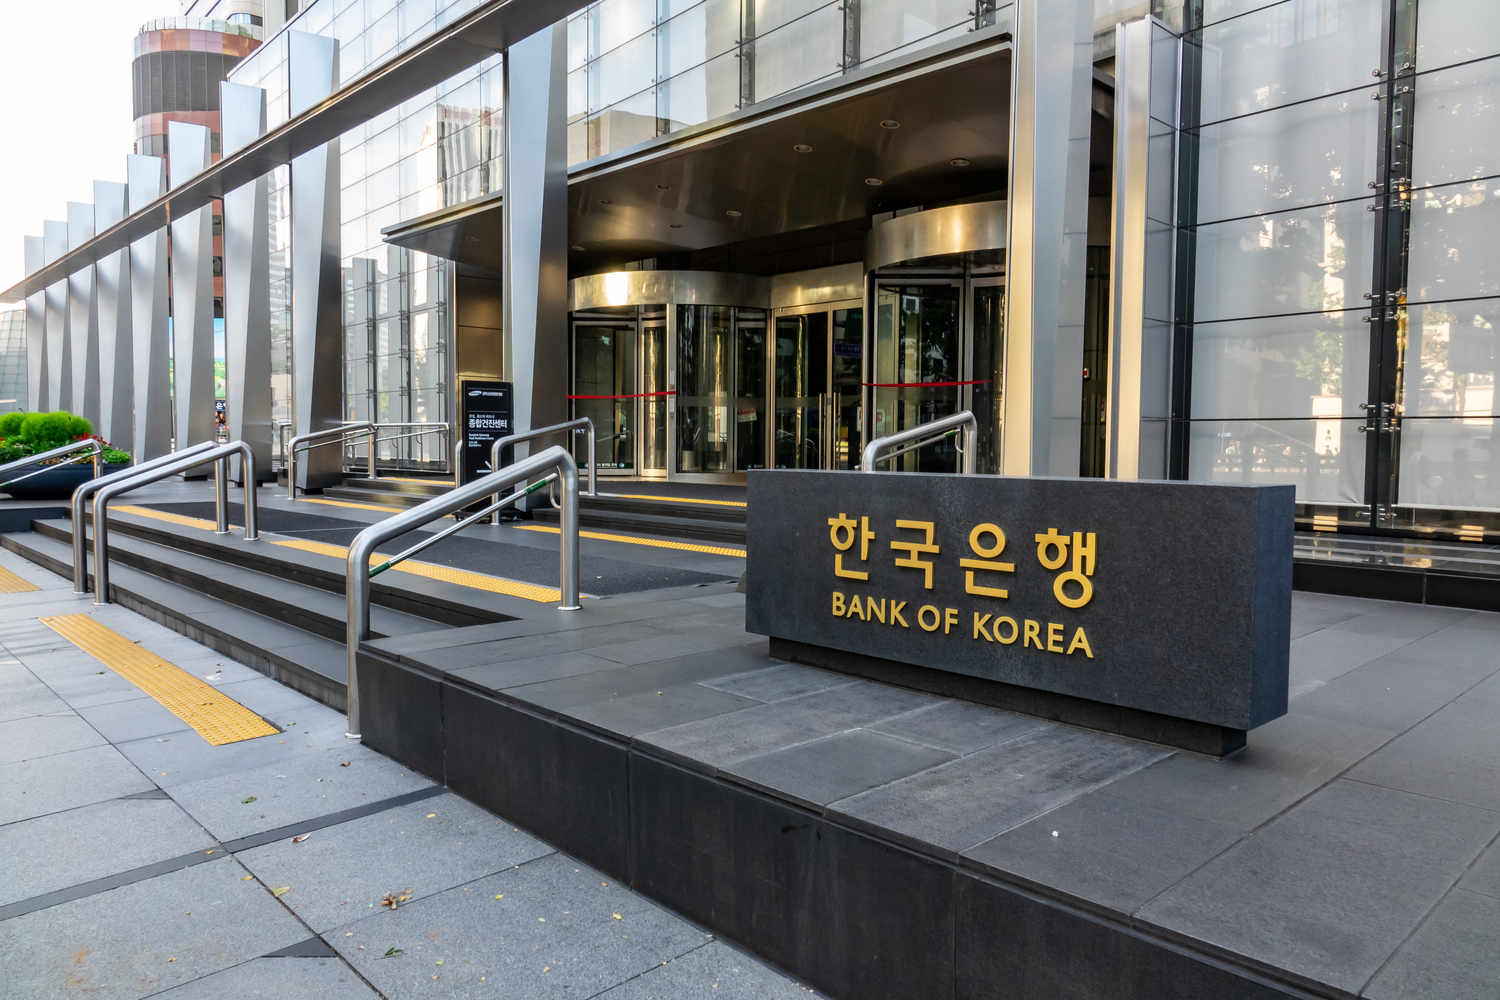 South Korean Central Bank Announced The Completion Of The First Phase Of Its CBDC Simulated Testing.